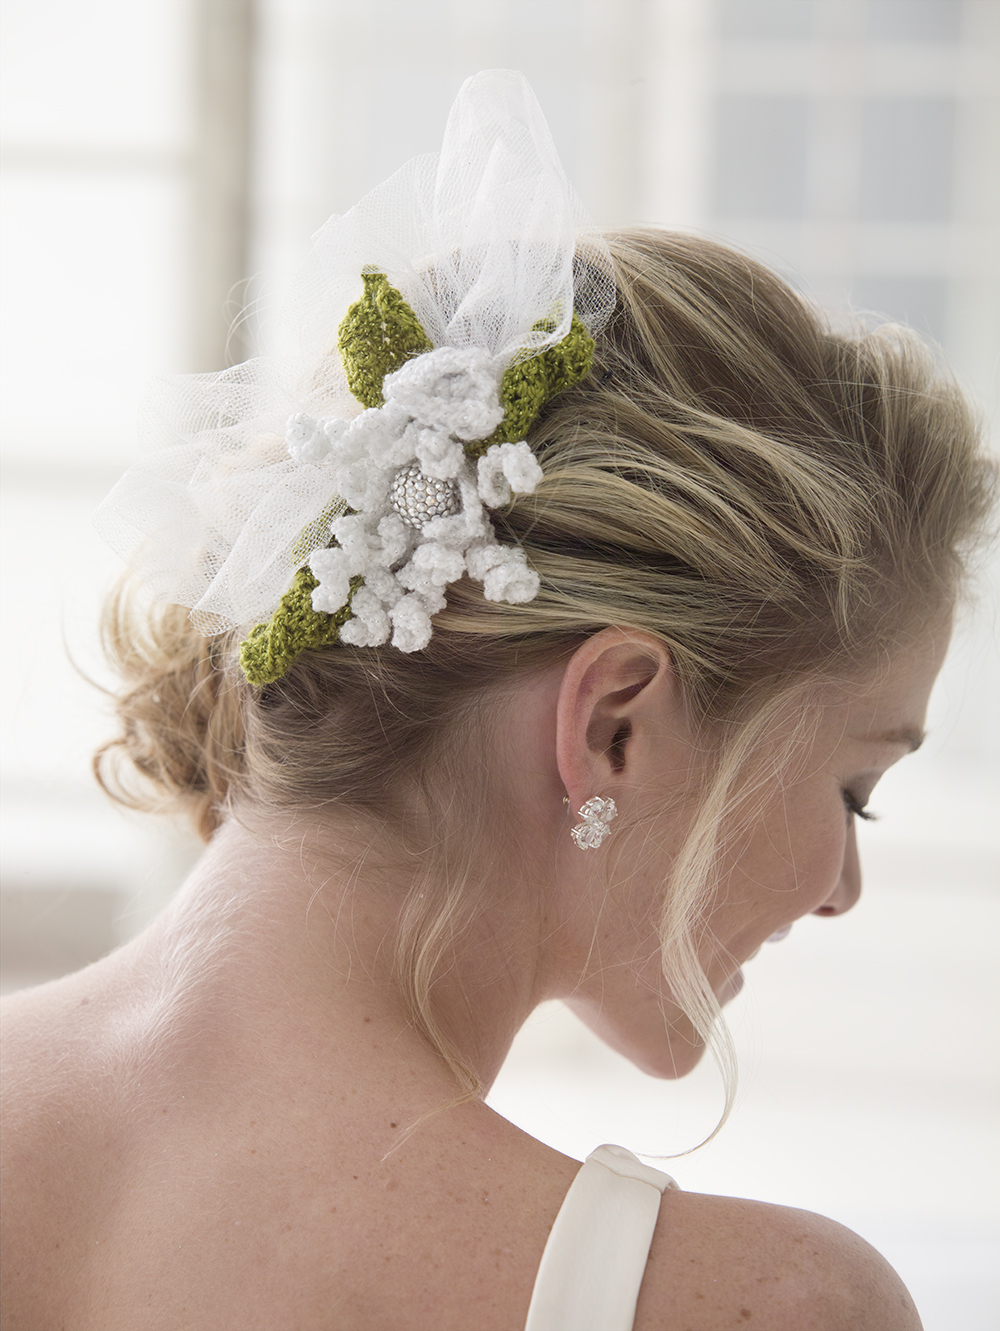 Here Are Some Bridal Hair Accessories Other Than Flowers